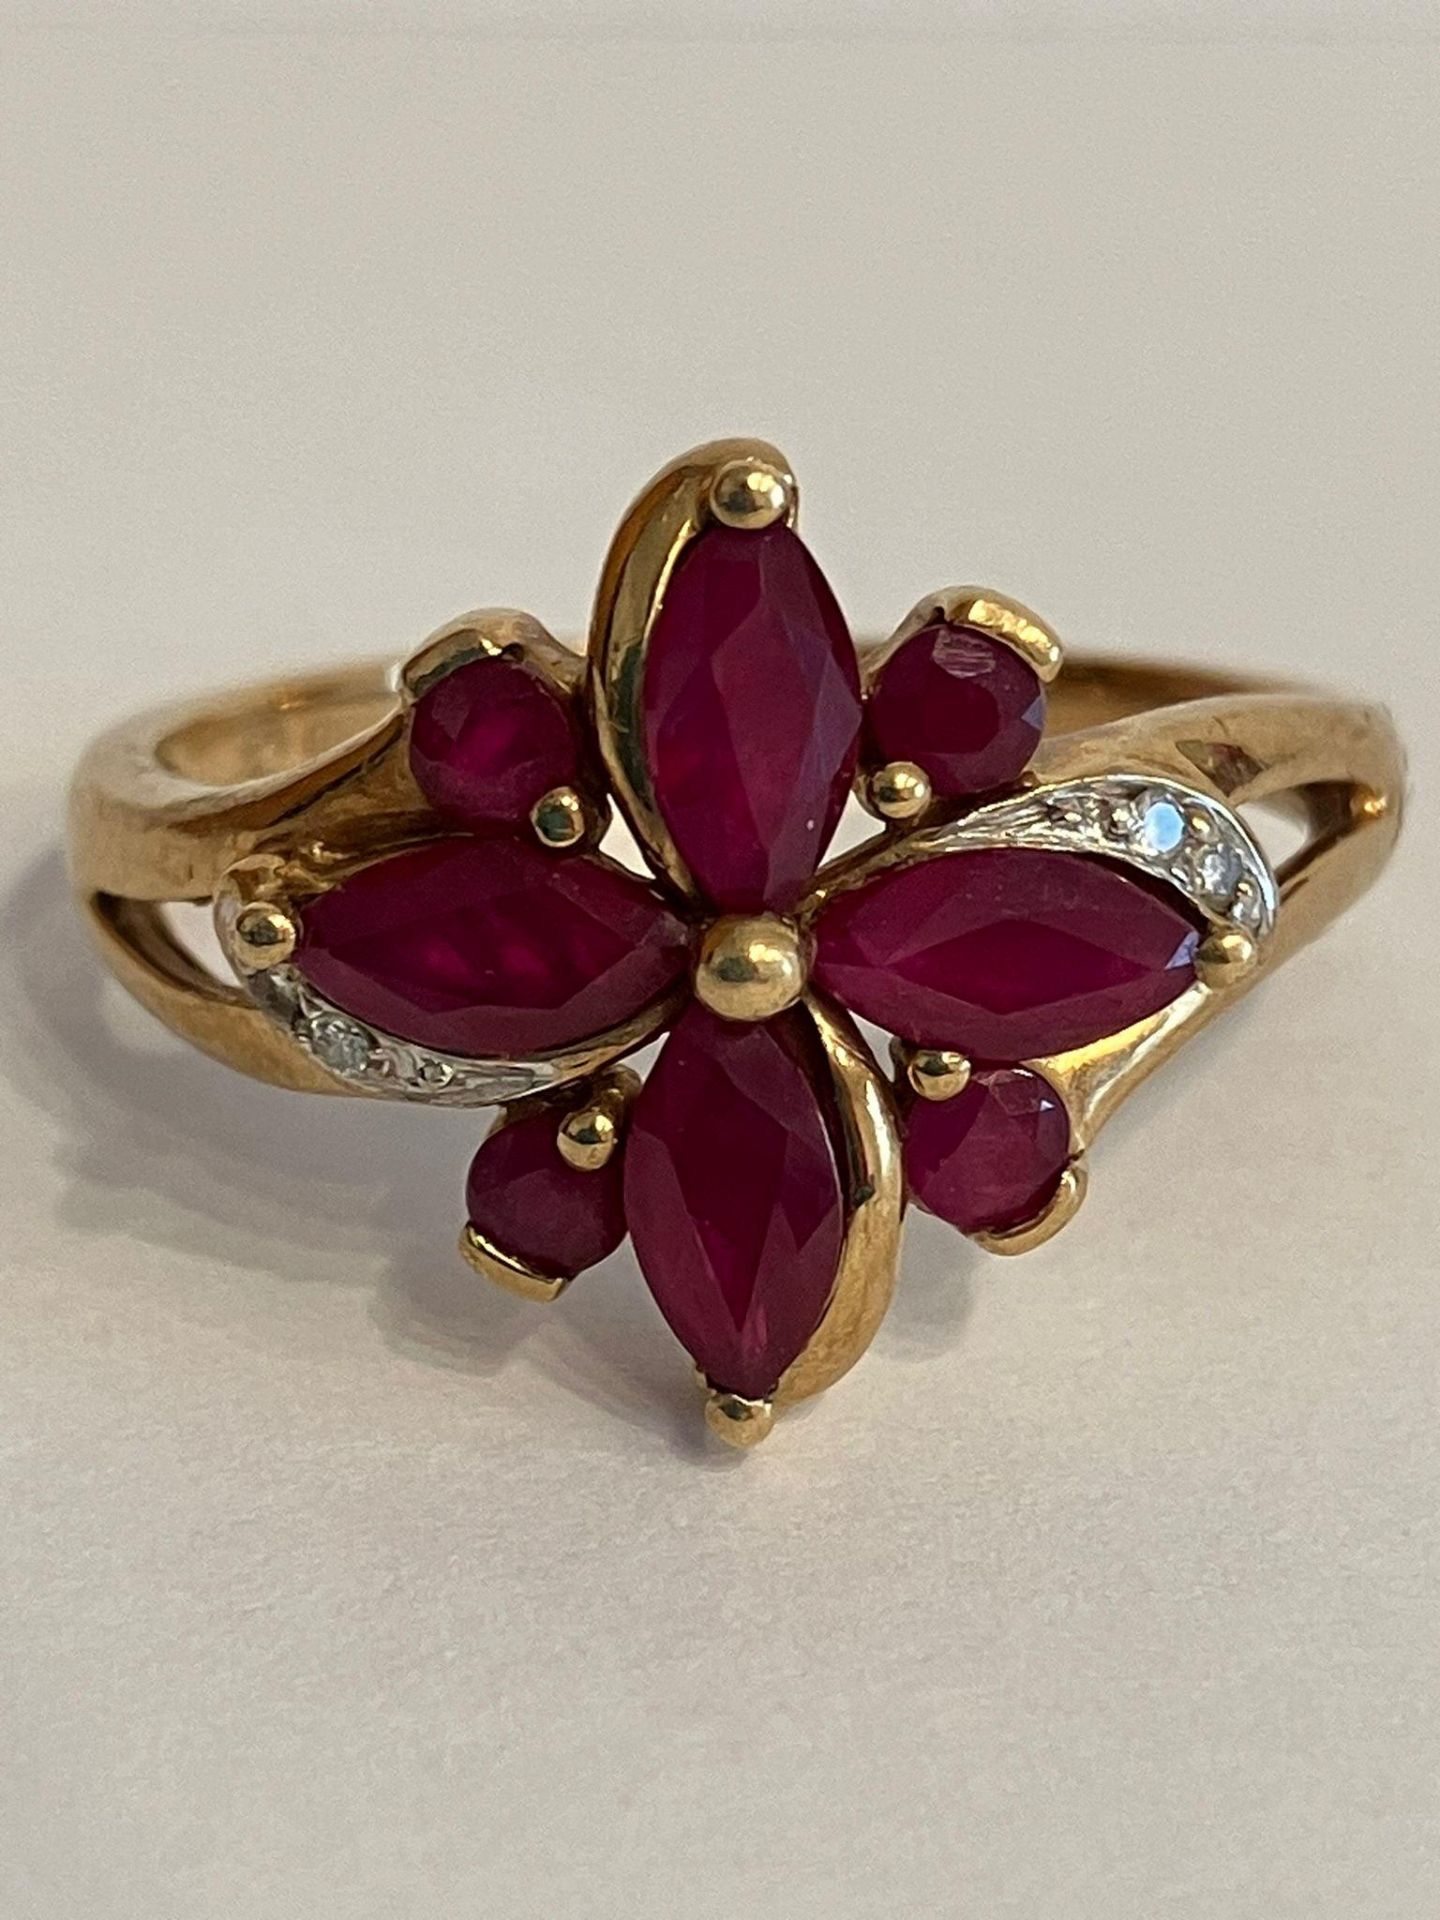 Stunning 9 carat YELLOW GOLD, DIAMOND and RUBY RING. Consisting a cluster of RUBY BAGUETTES with